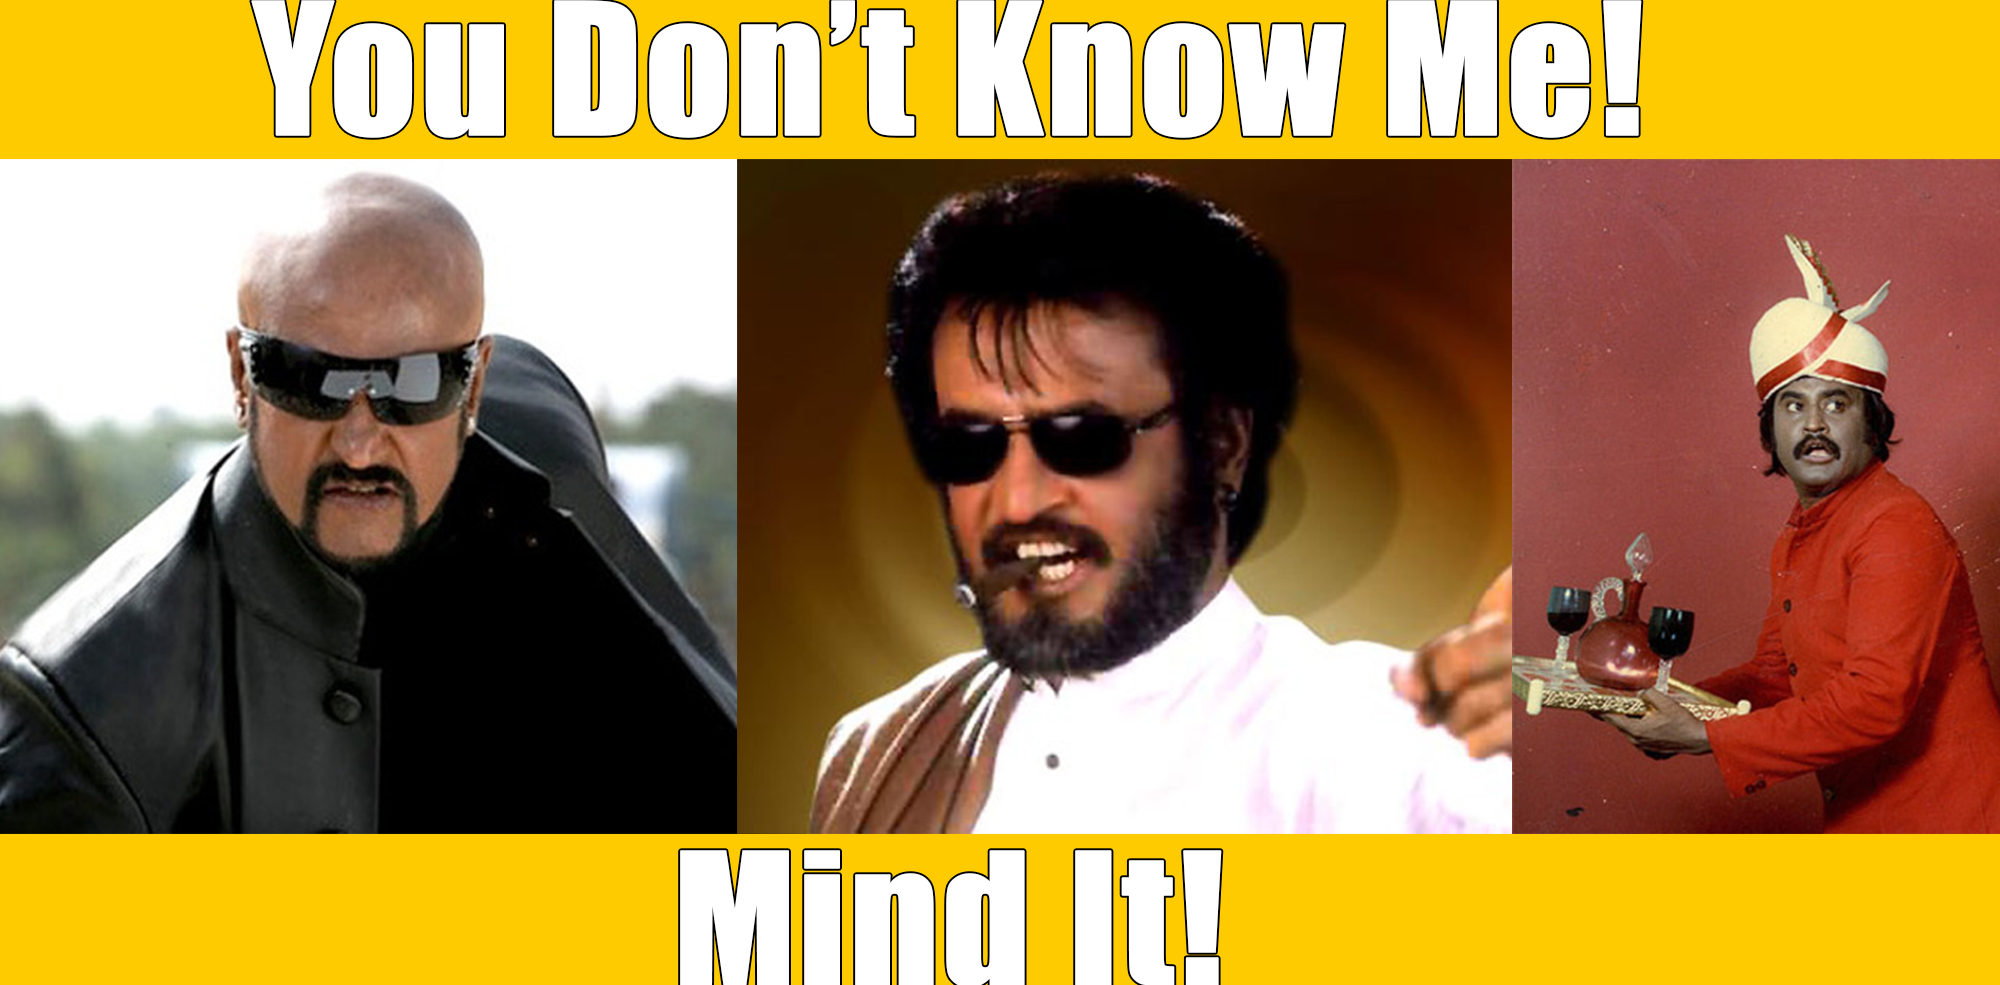 7 Truths/Facts About Rajnikant You Didn't Know RVCJ Media